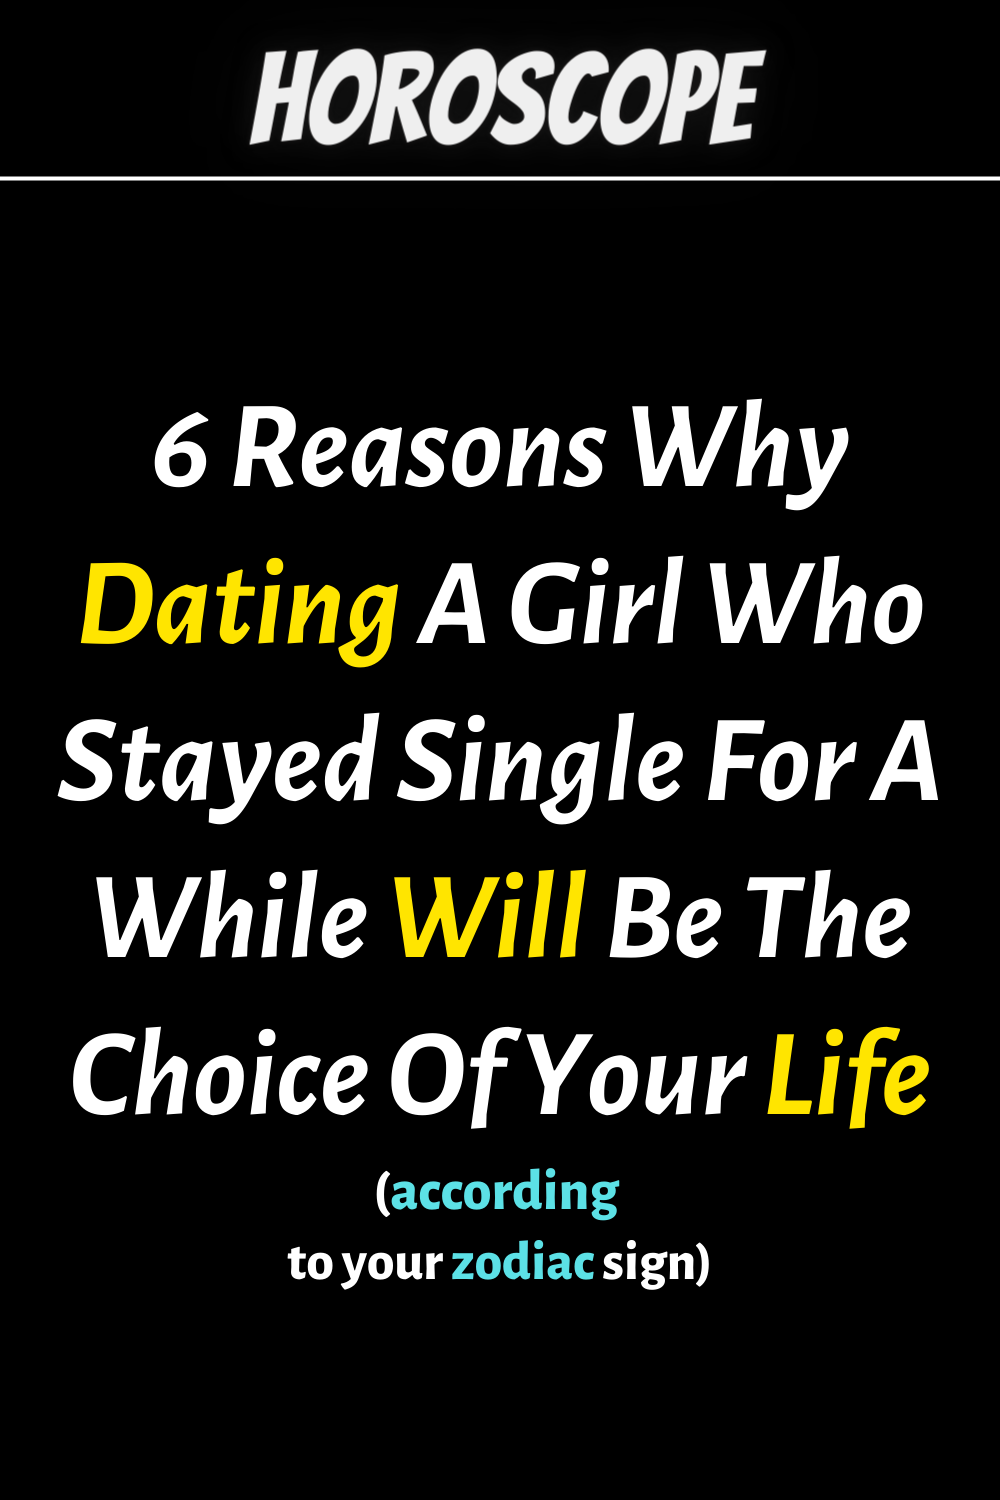 6 Reasons Why Dating A Girl Who Stayed Single For A While Will Be The Choice Of Your Life